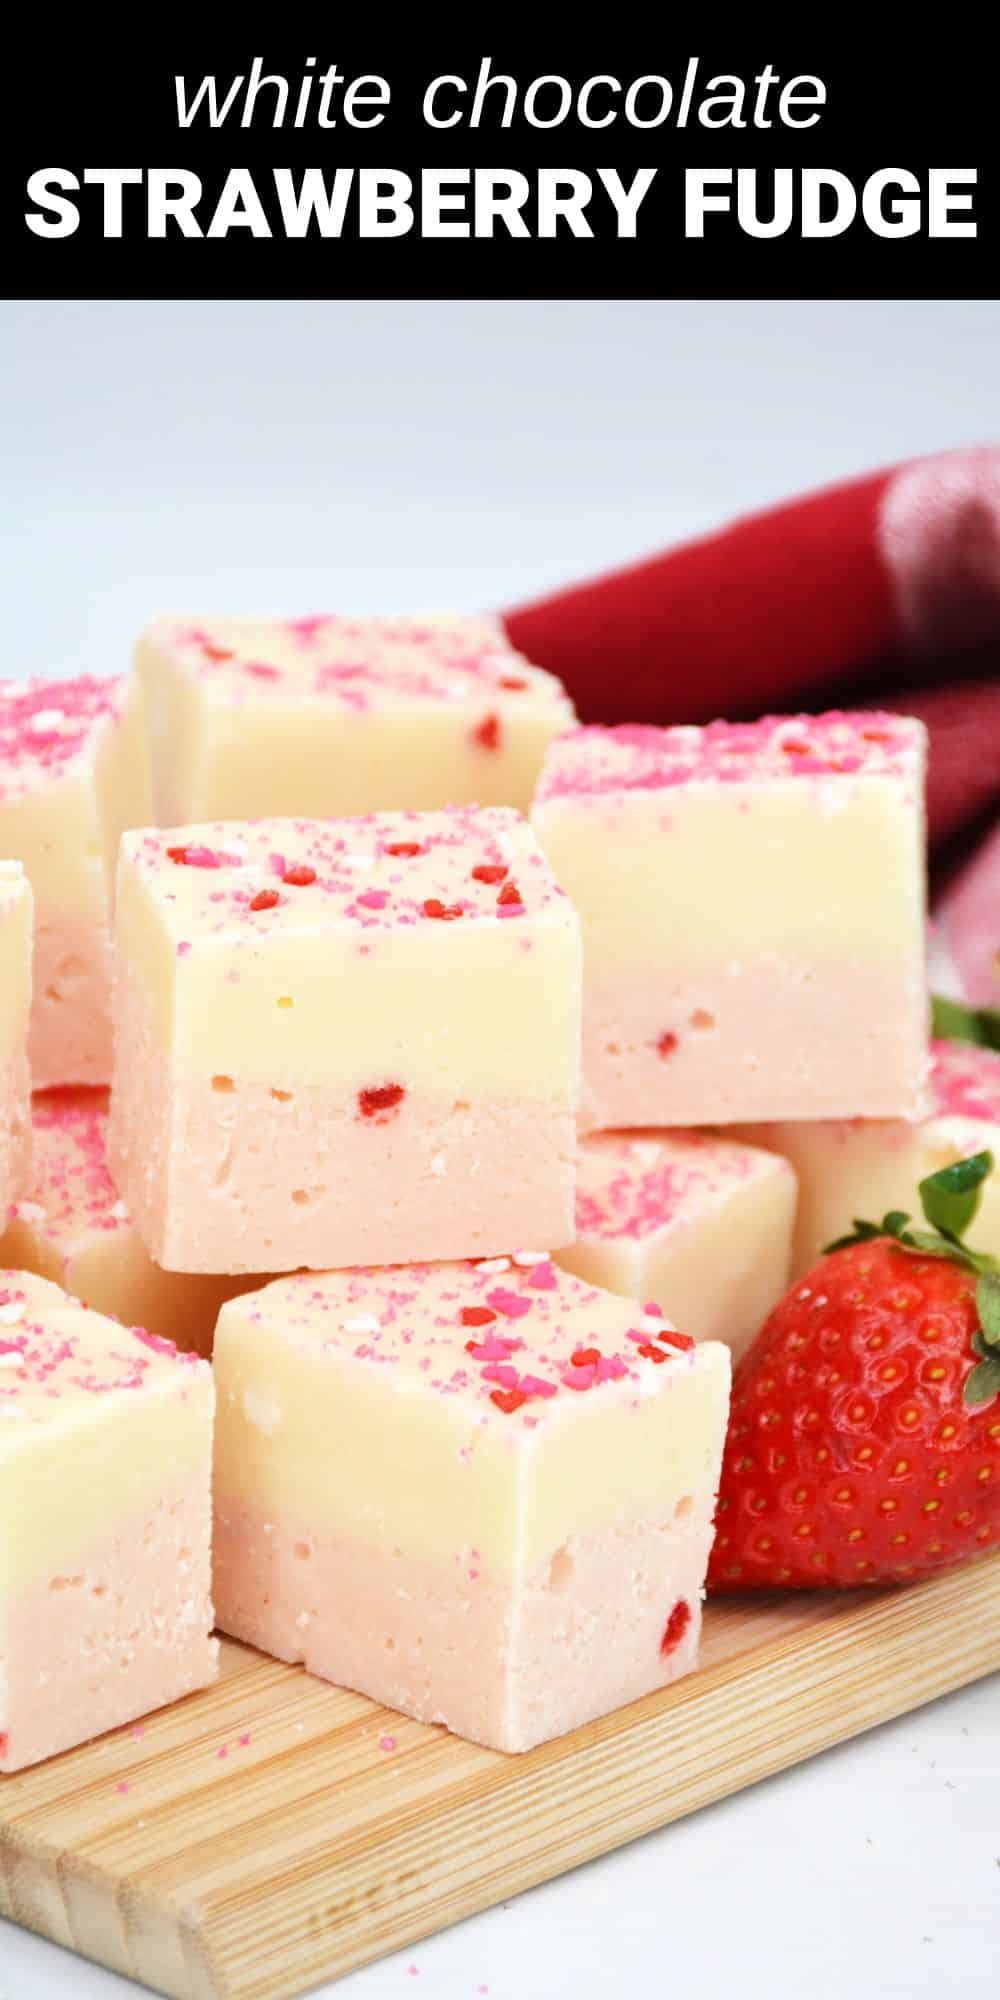 This easy recipe for sweet and festive 4-ingredient White Chocolate Strawberry Fudge is not only really delicious, it's pretty too! It’s the perfect treat for making with your kids during the holidays, on Valentine’s Day, birthdays or any time of the year. 